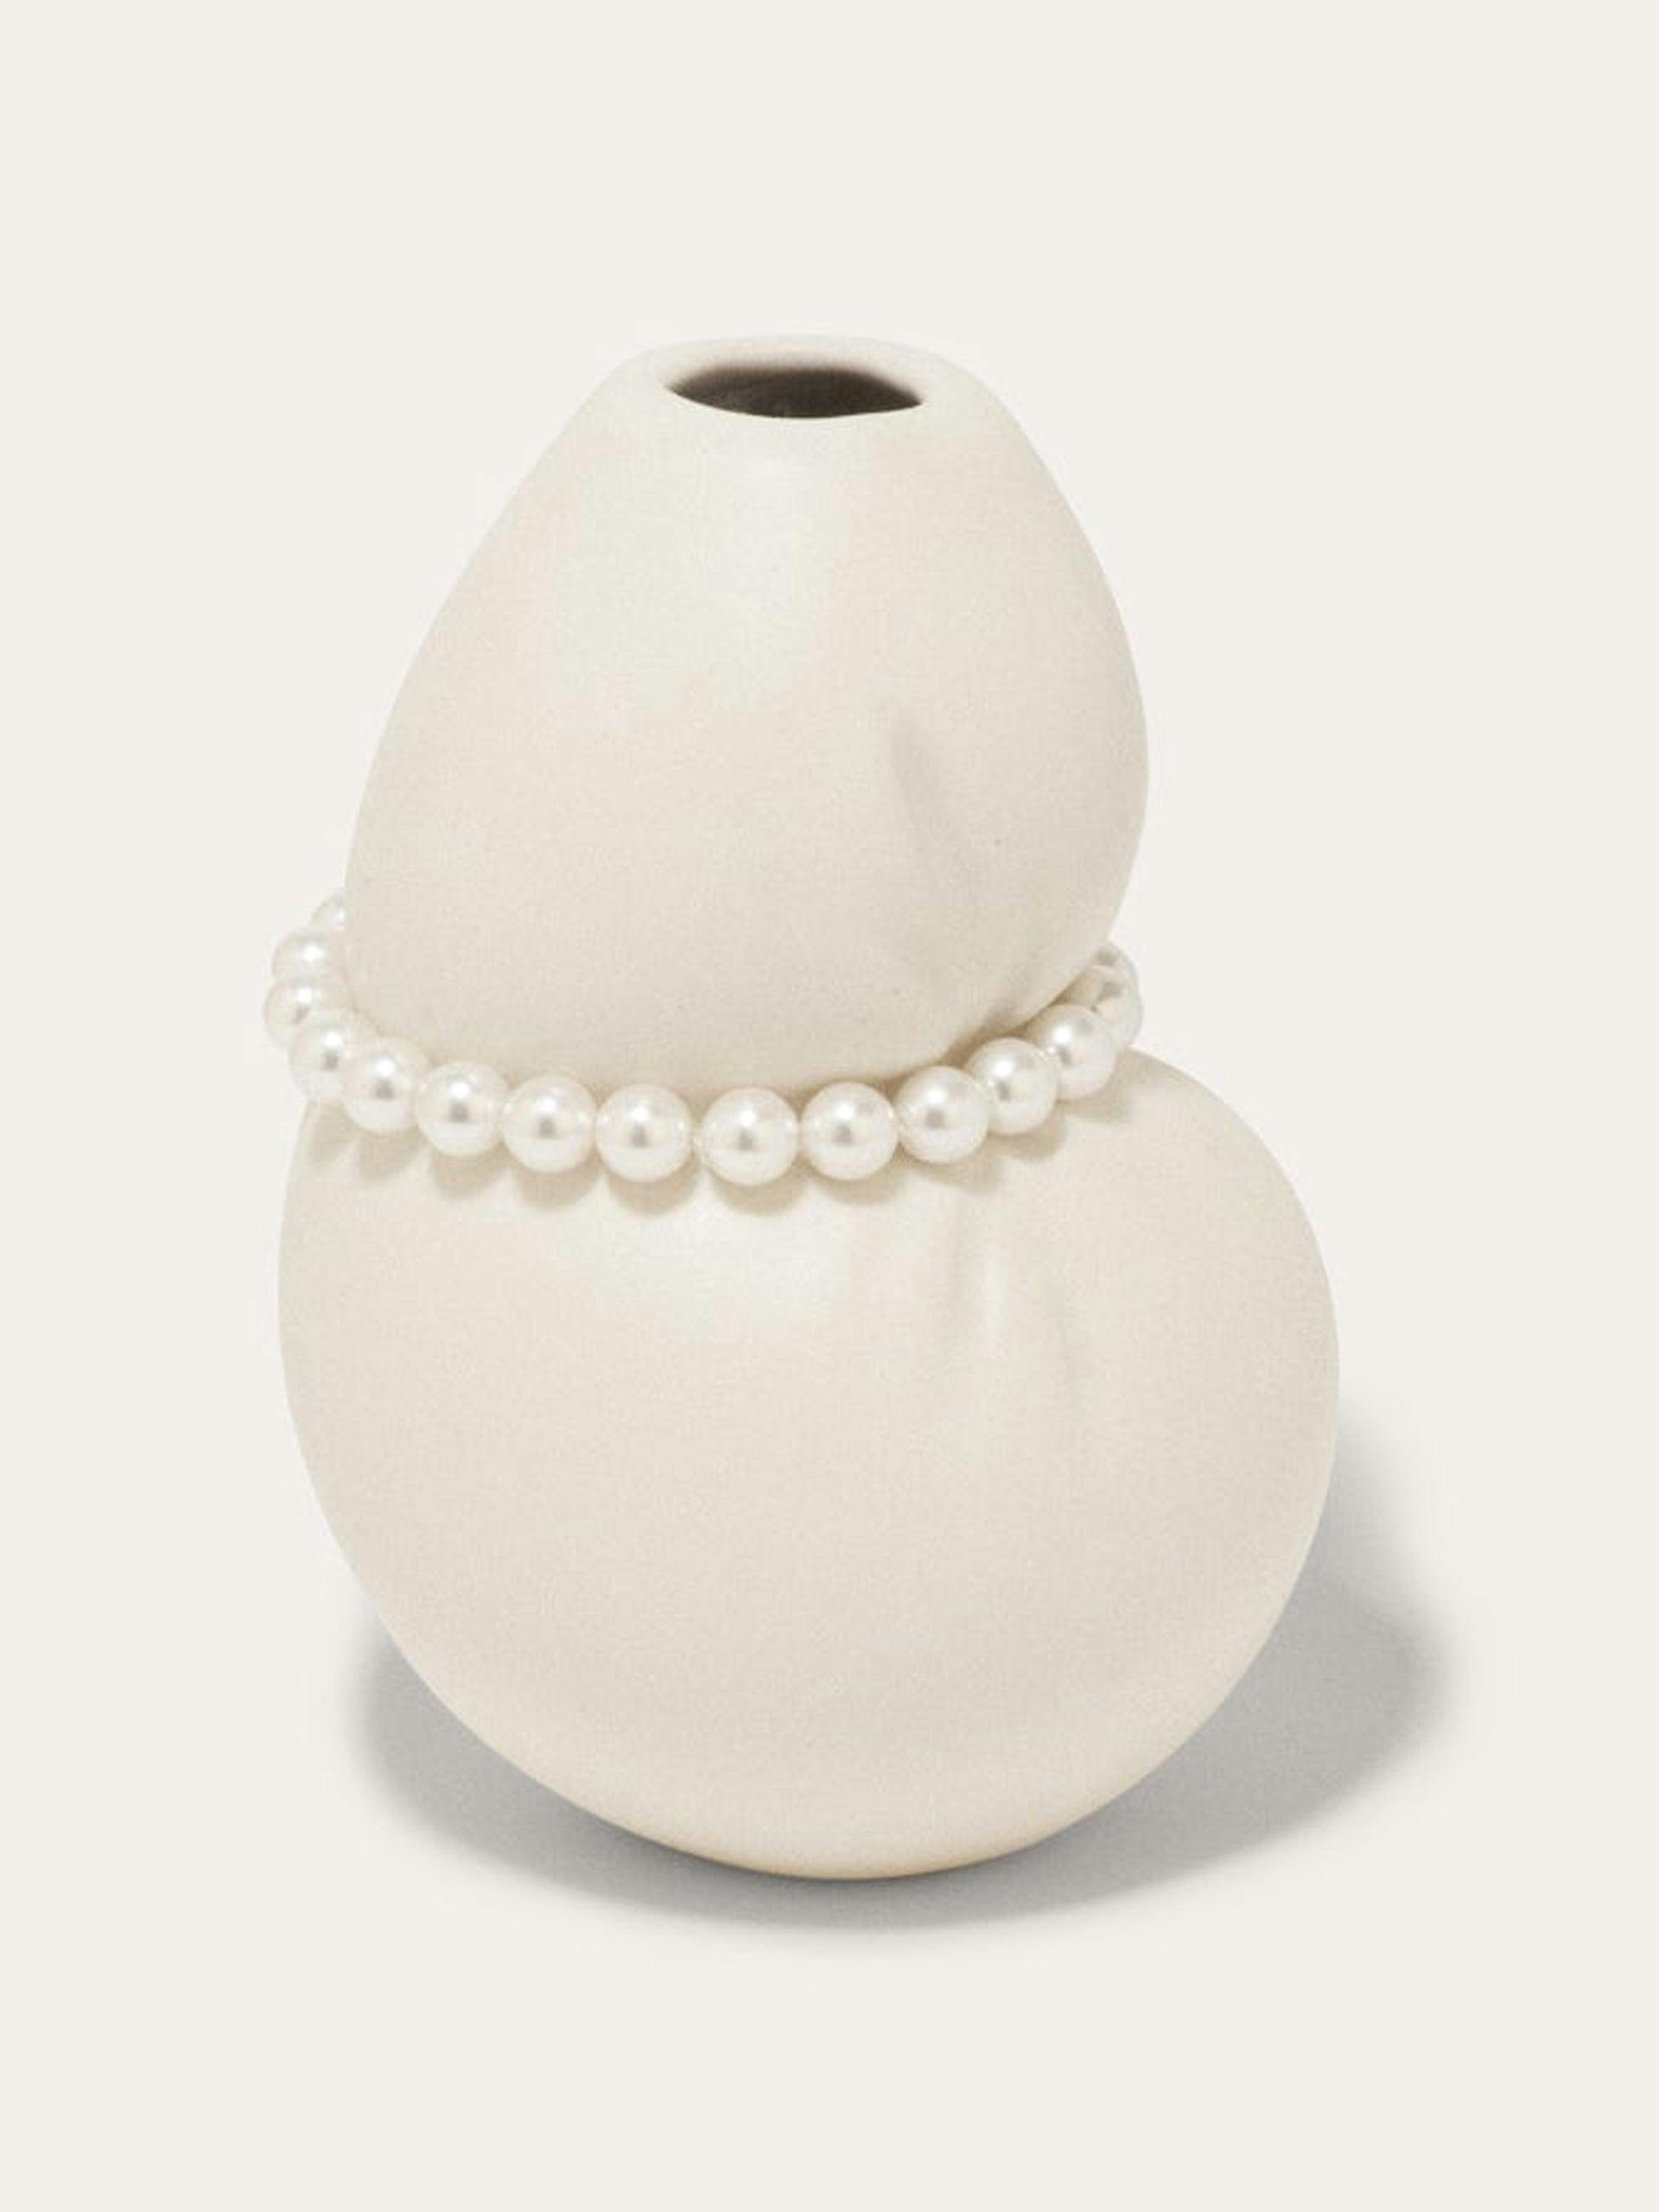 "Squeezed" small vase in matte white with faux pearls